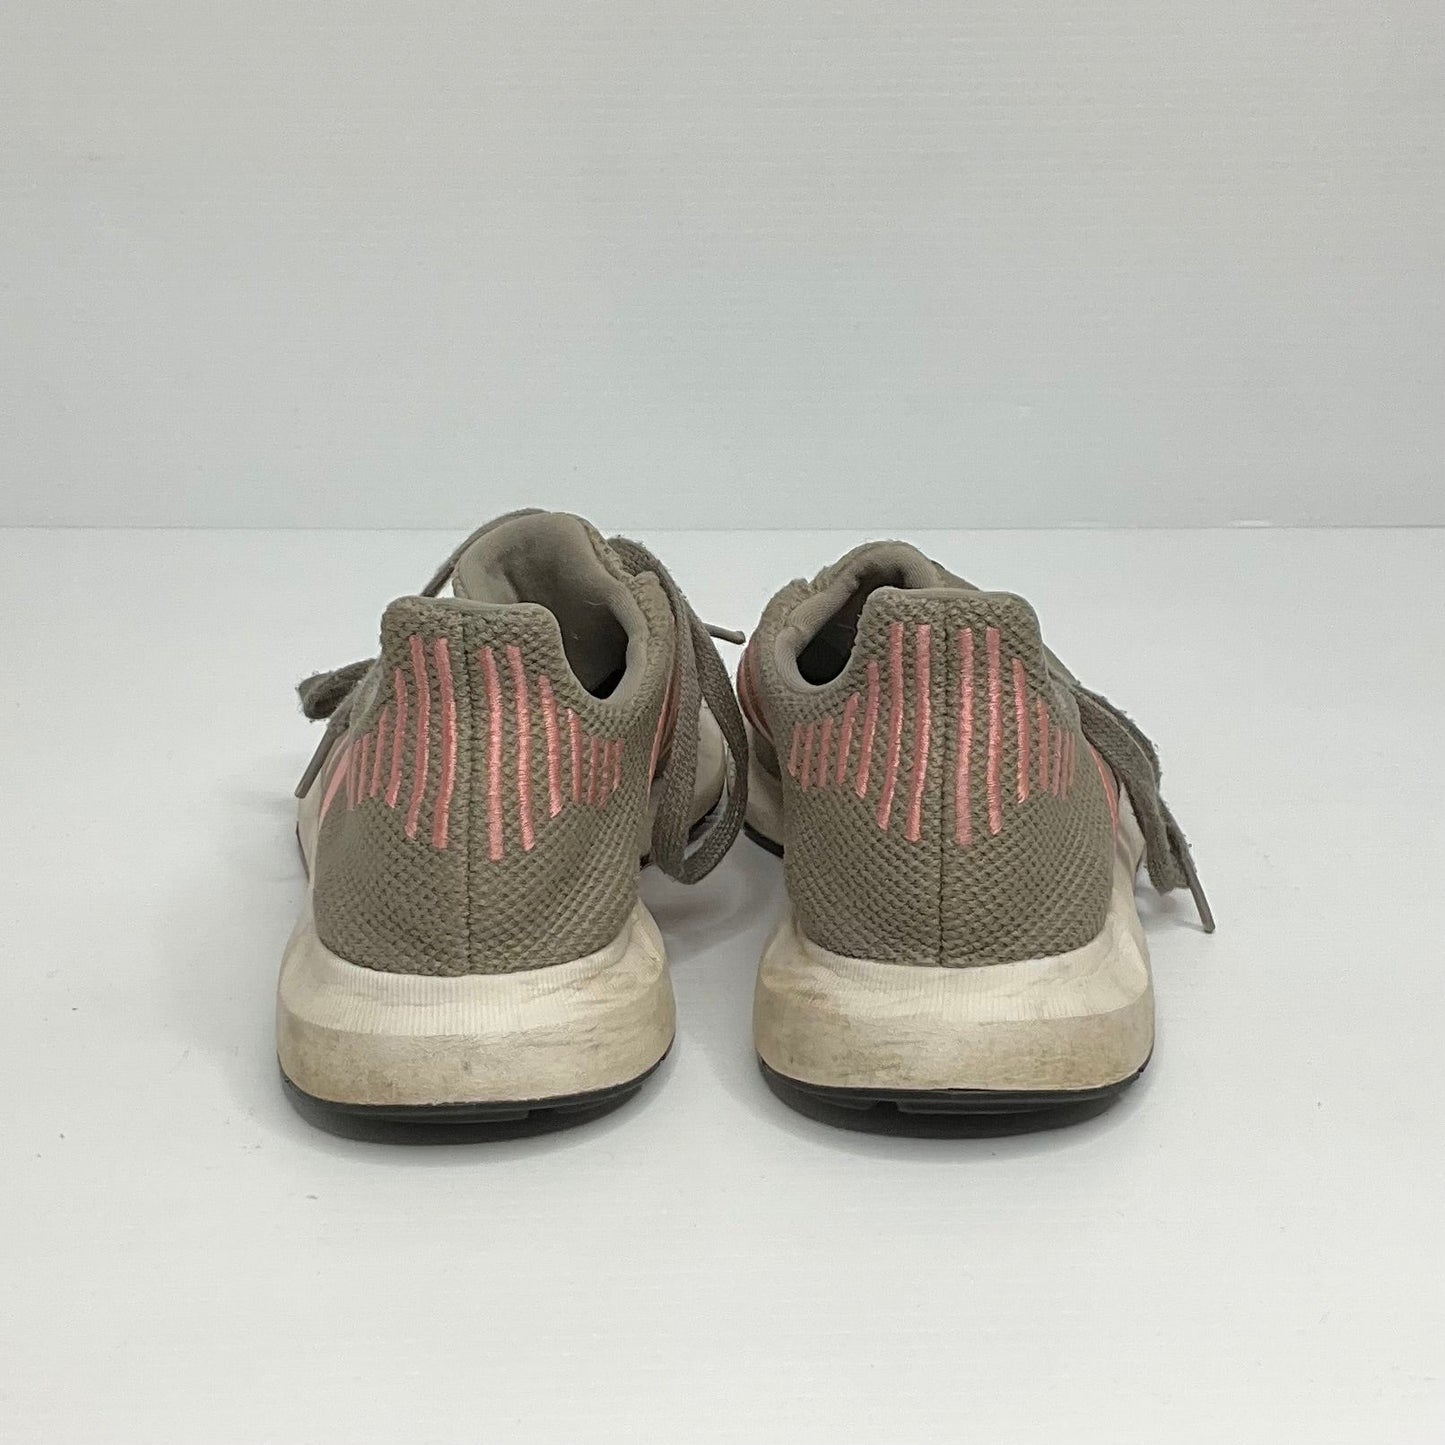 Pink & Tan Shoes Sneakers Adidas, Size 6.5